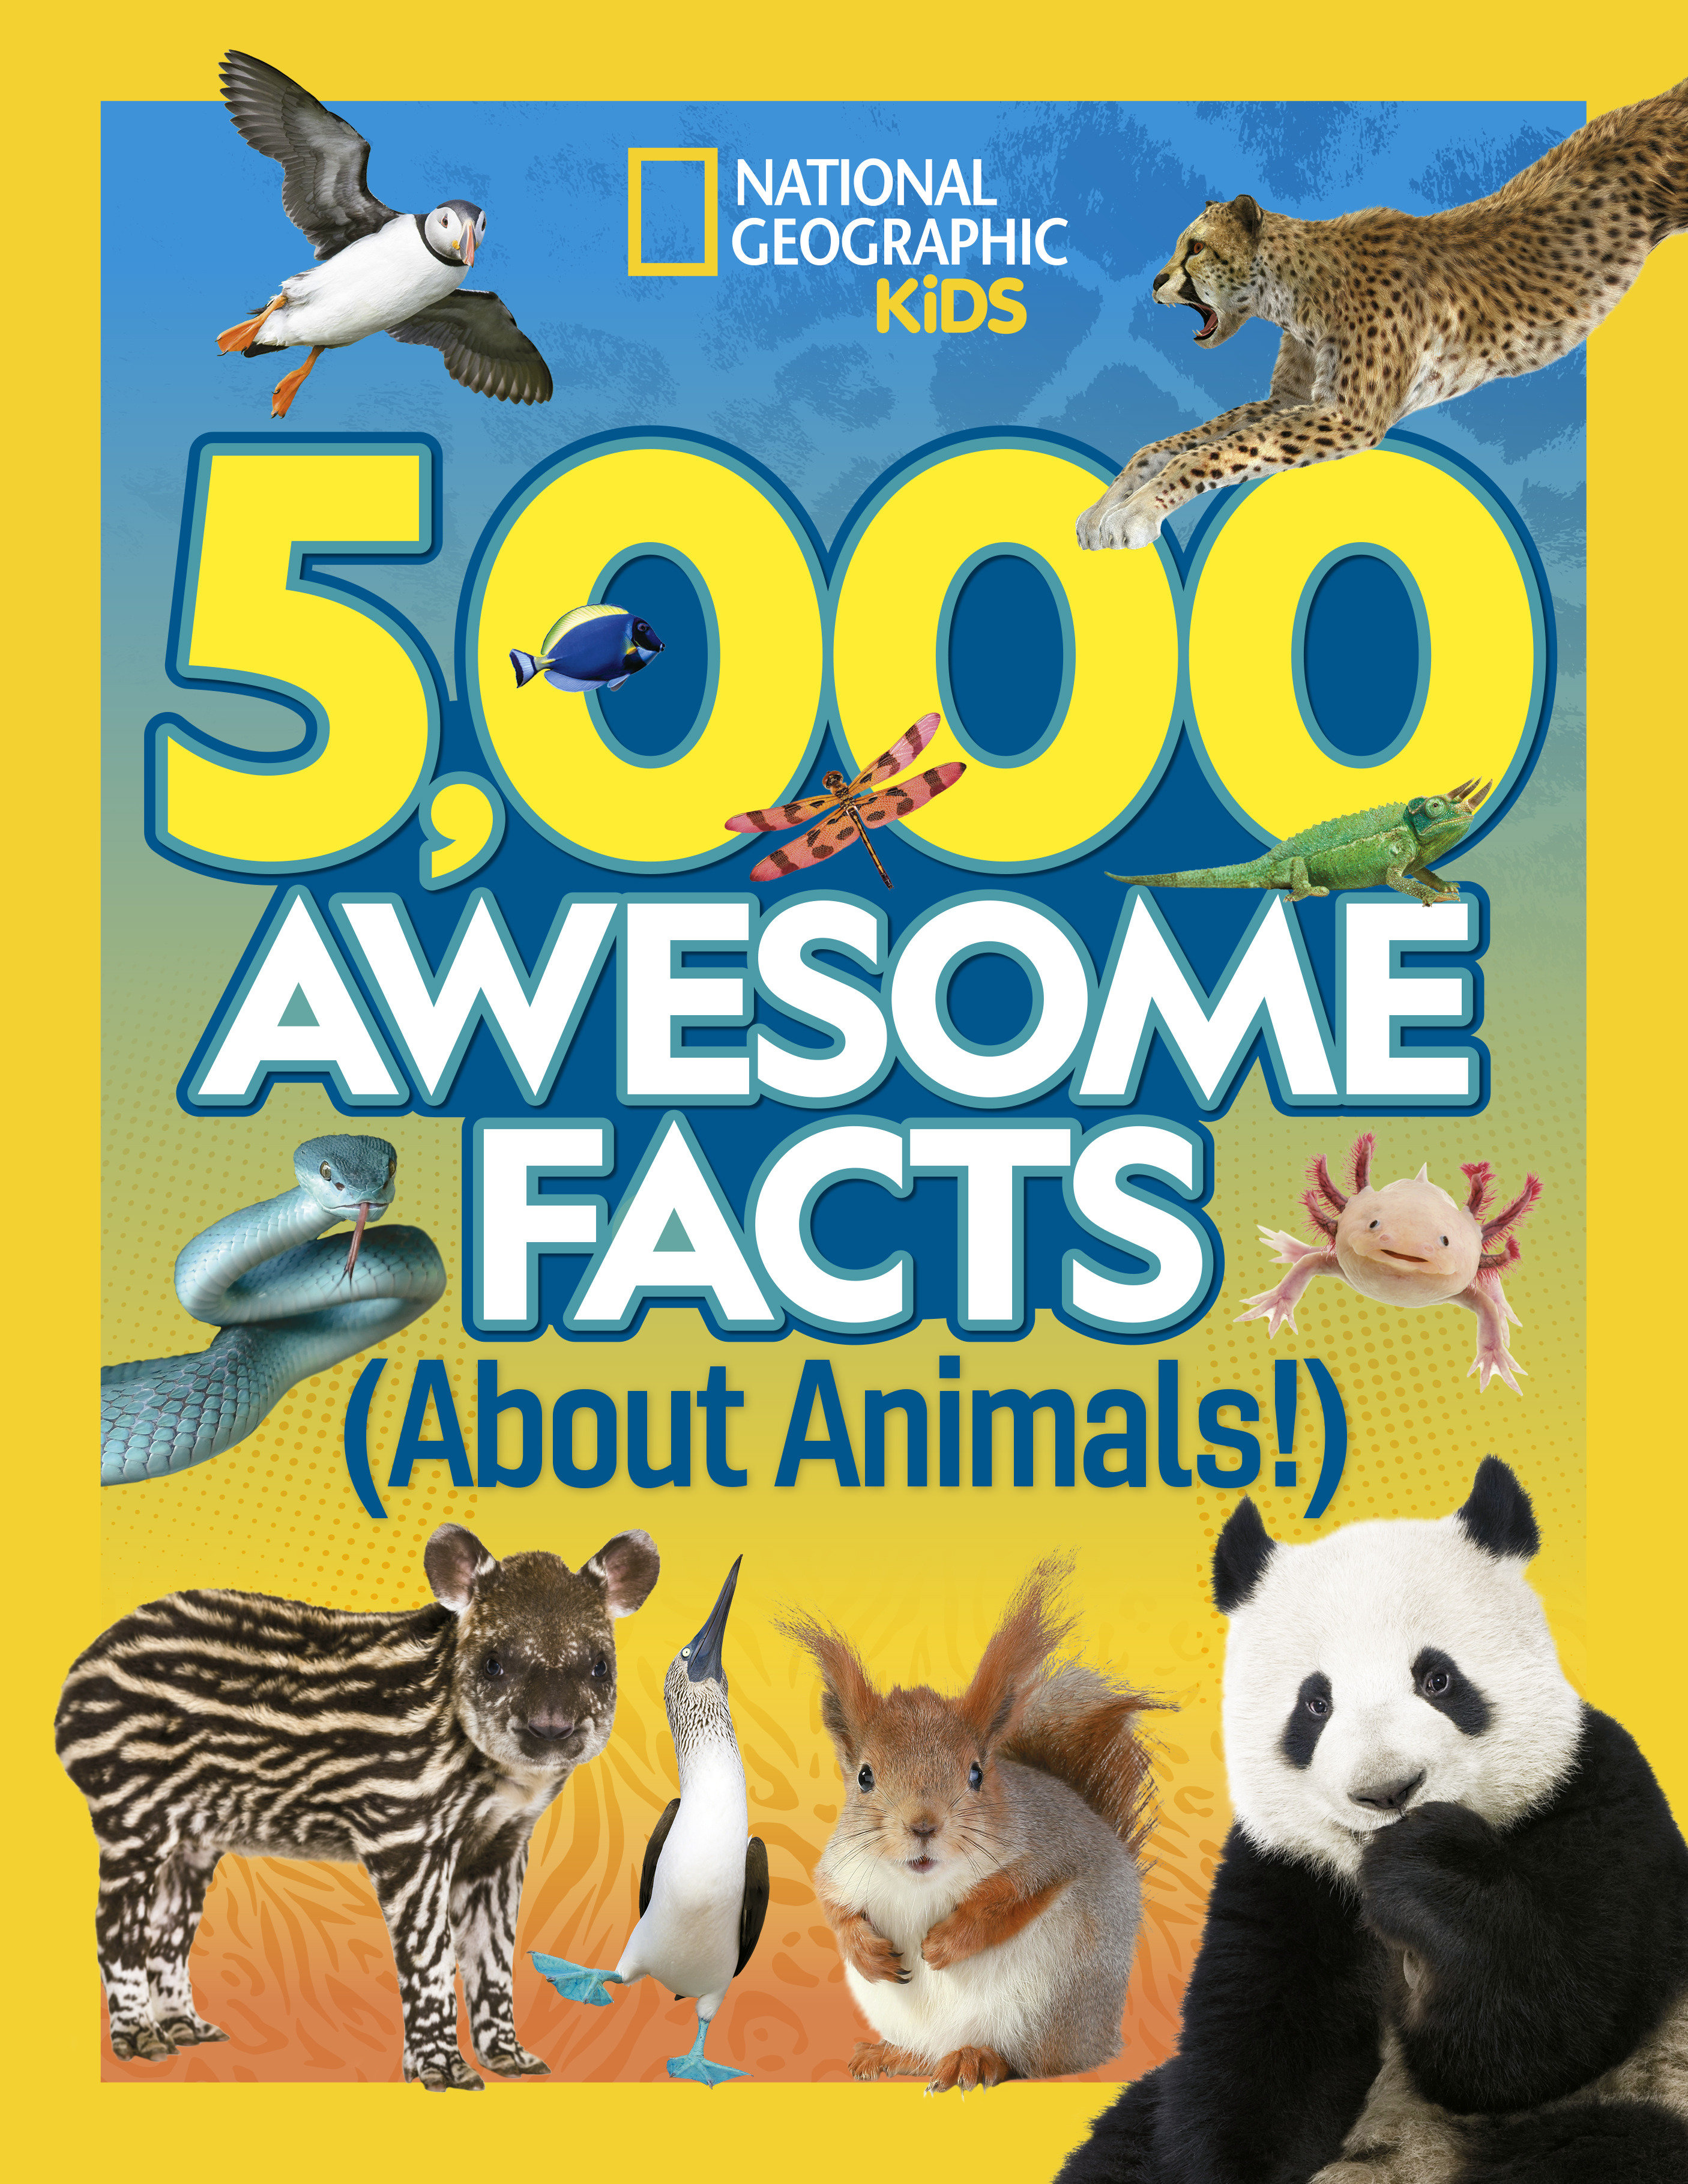 5,000 Awesome Facts About Animals (Hardcover Book)